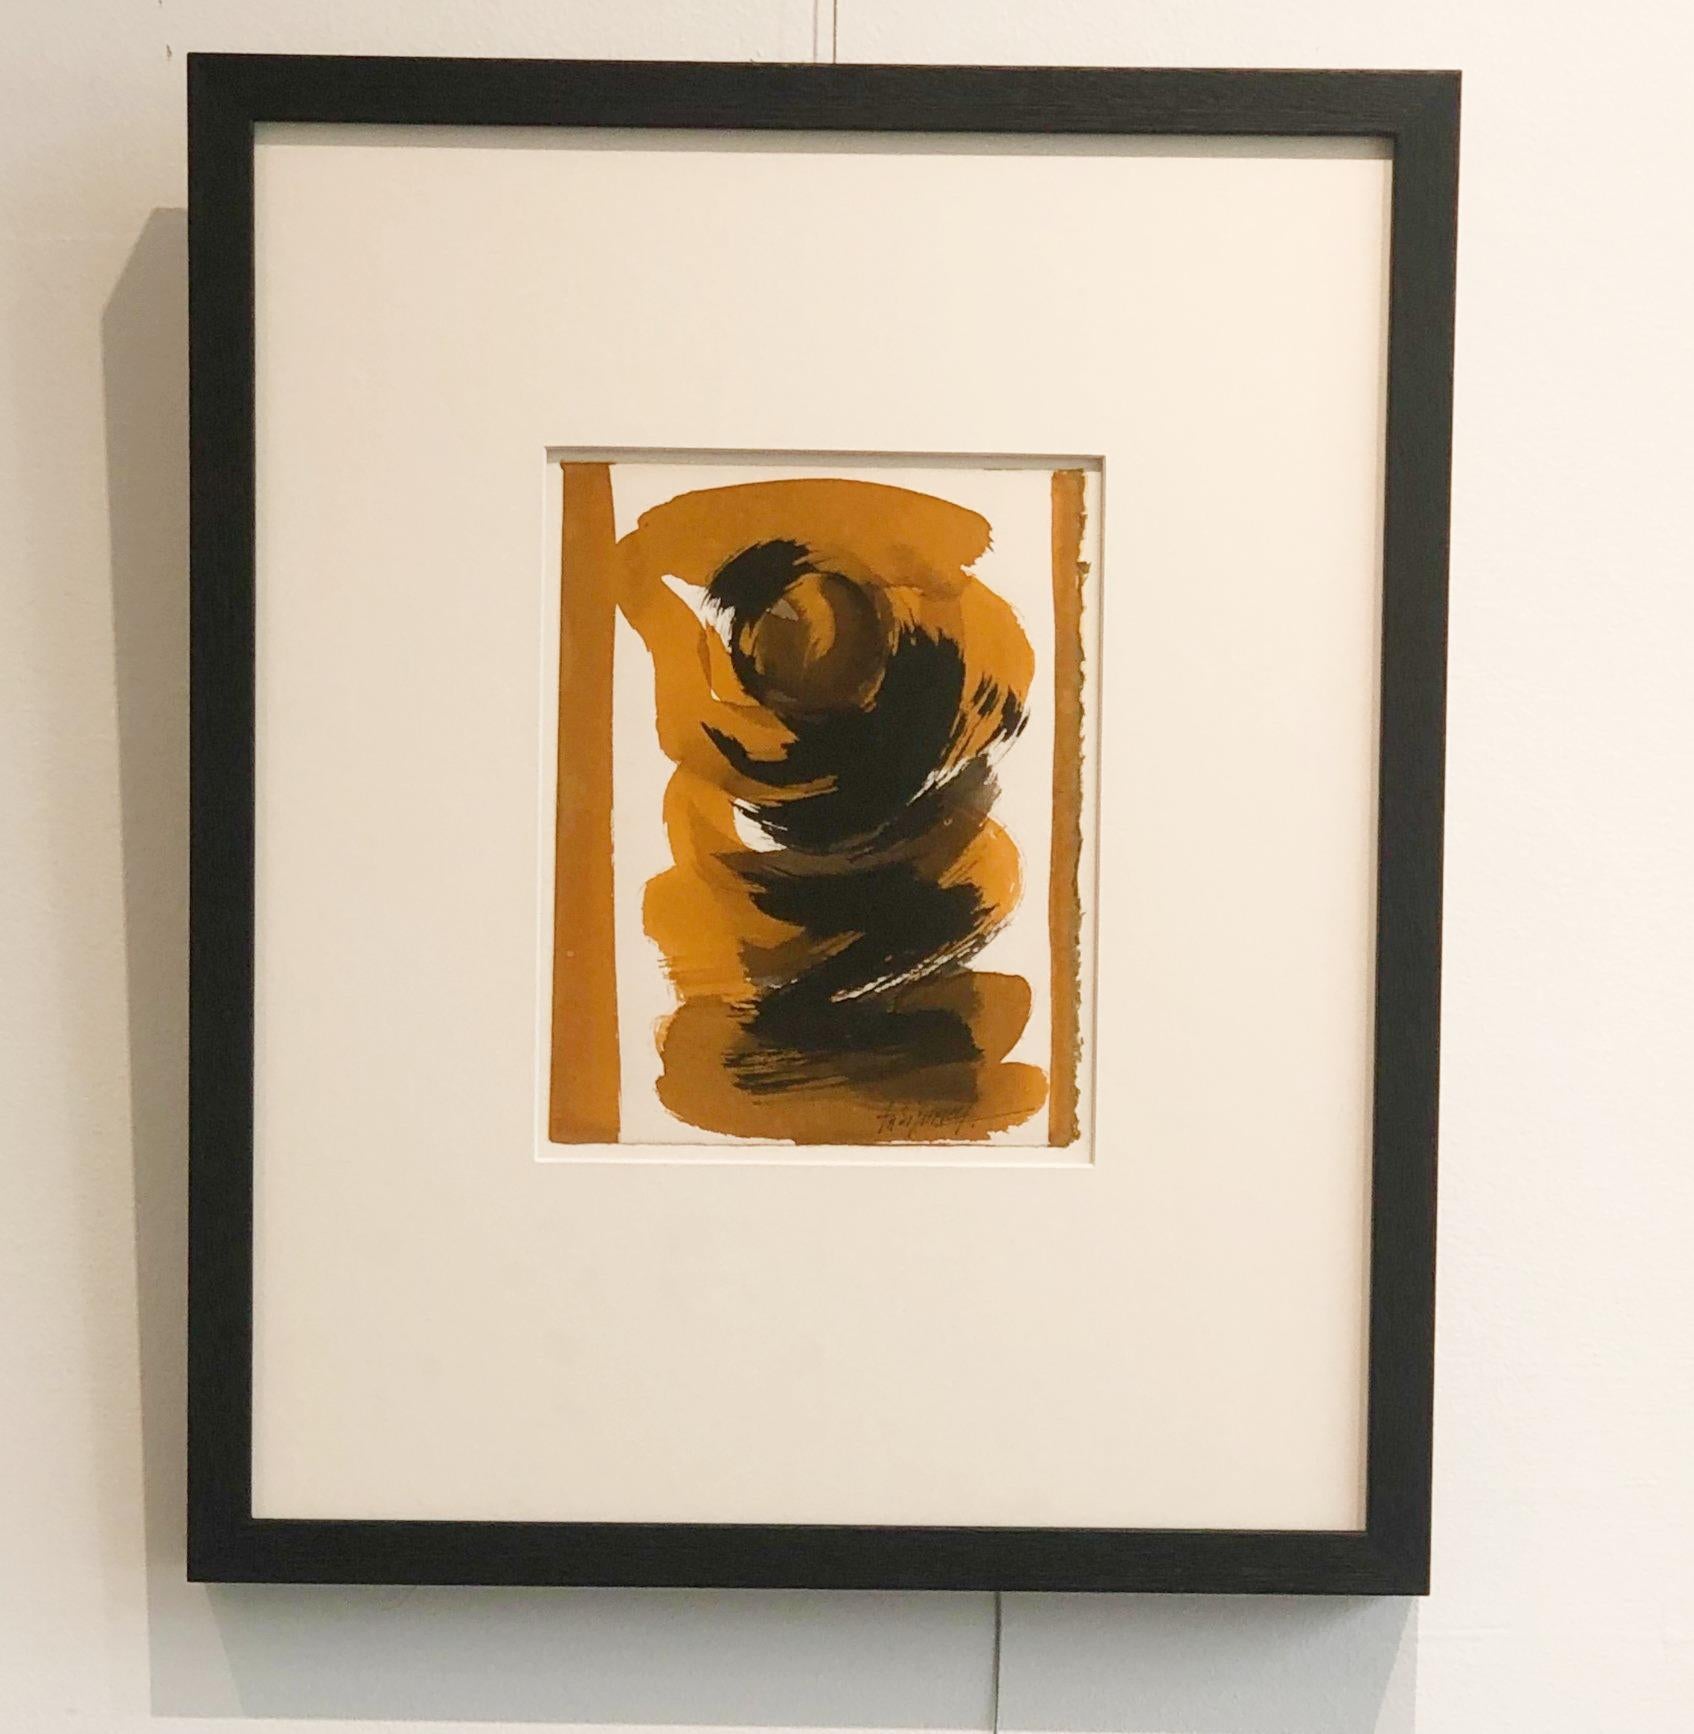 Jean Signovert

​

Composition

 

gouache, signed lower right, 20.5 x 15cm

 

Provenance : Vente Pescheteau, Paris, November 1992;  Collection Weil-Thenon, Paris

Signovert initially trained as an engineer before enrolling at the École des Beaux